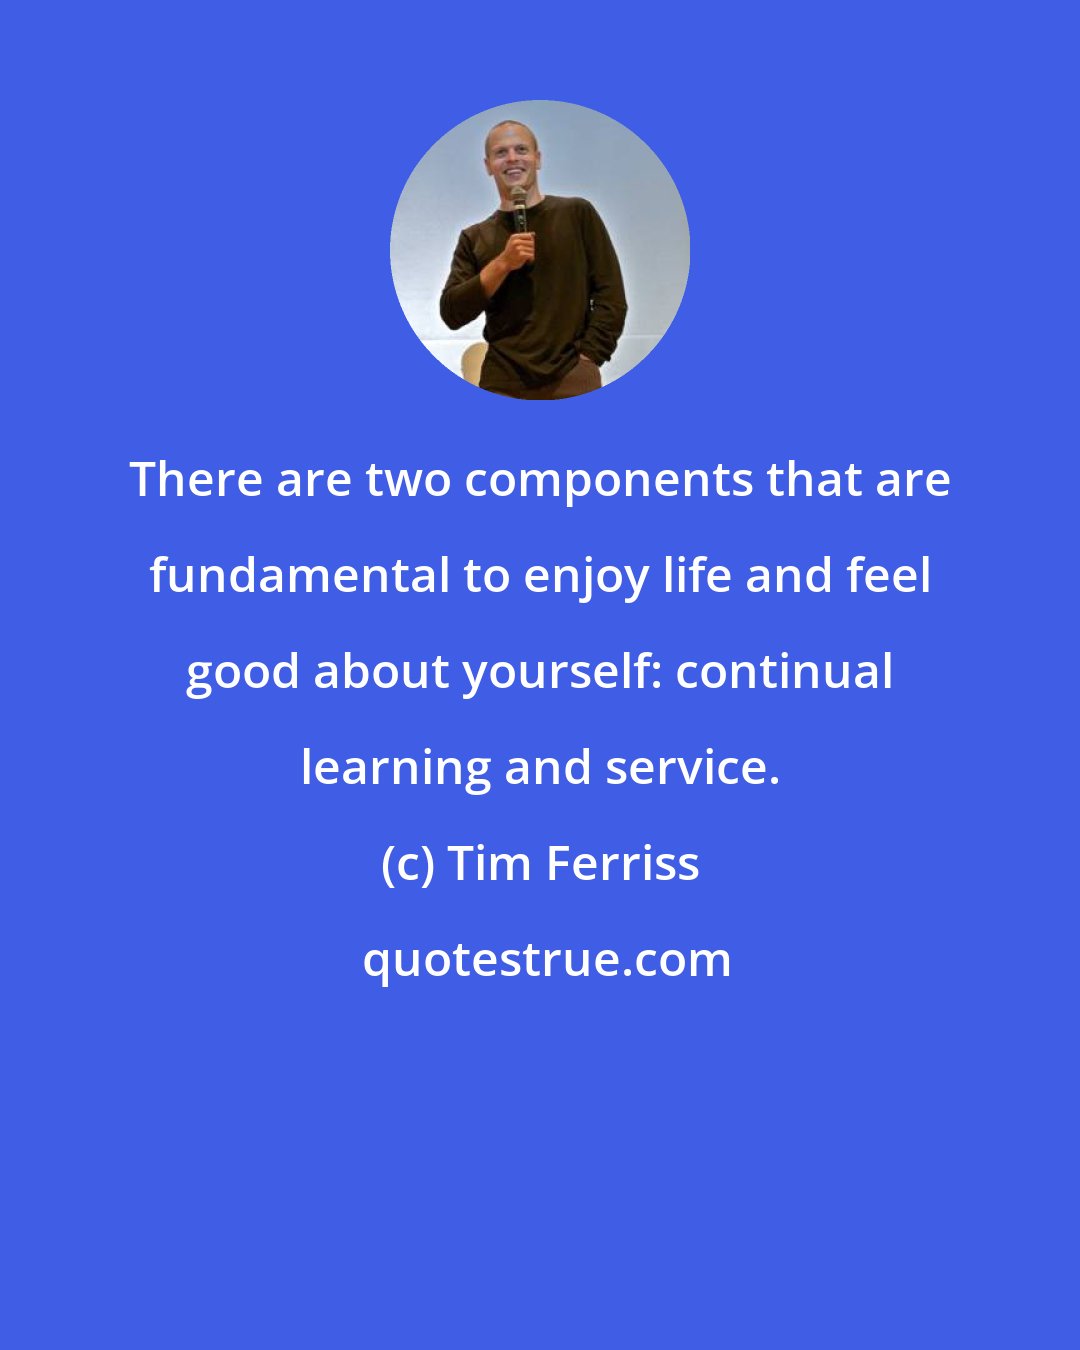 Tim Ferriss: There are two components that are fundamental to enjoy life and feel good about yourself: continual learning and service.